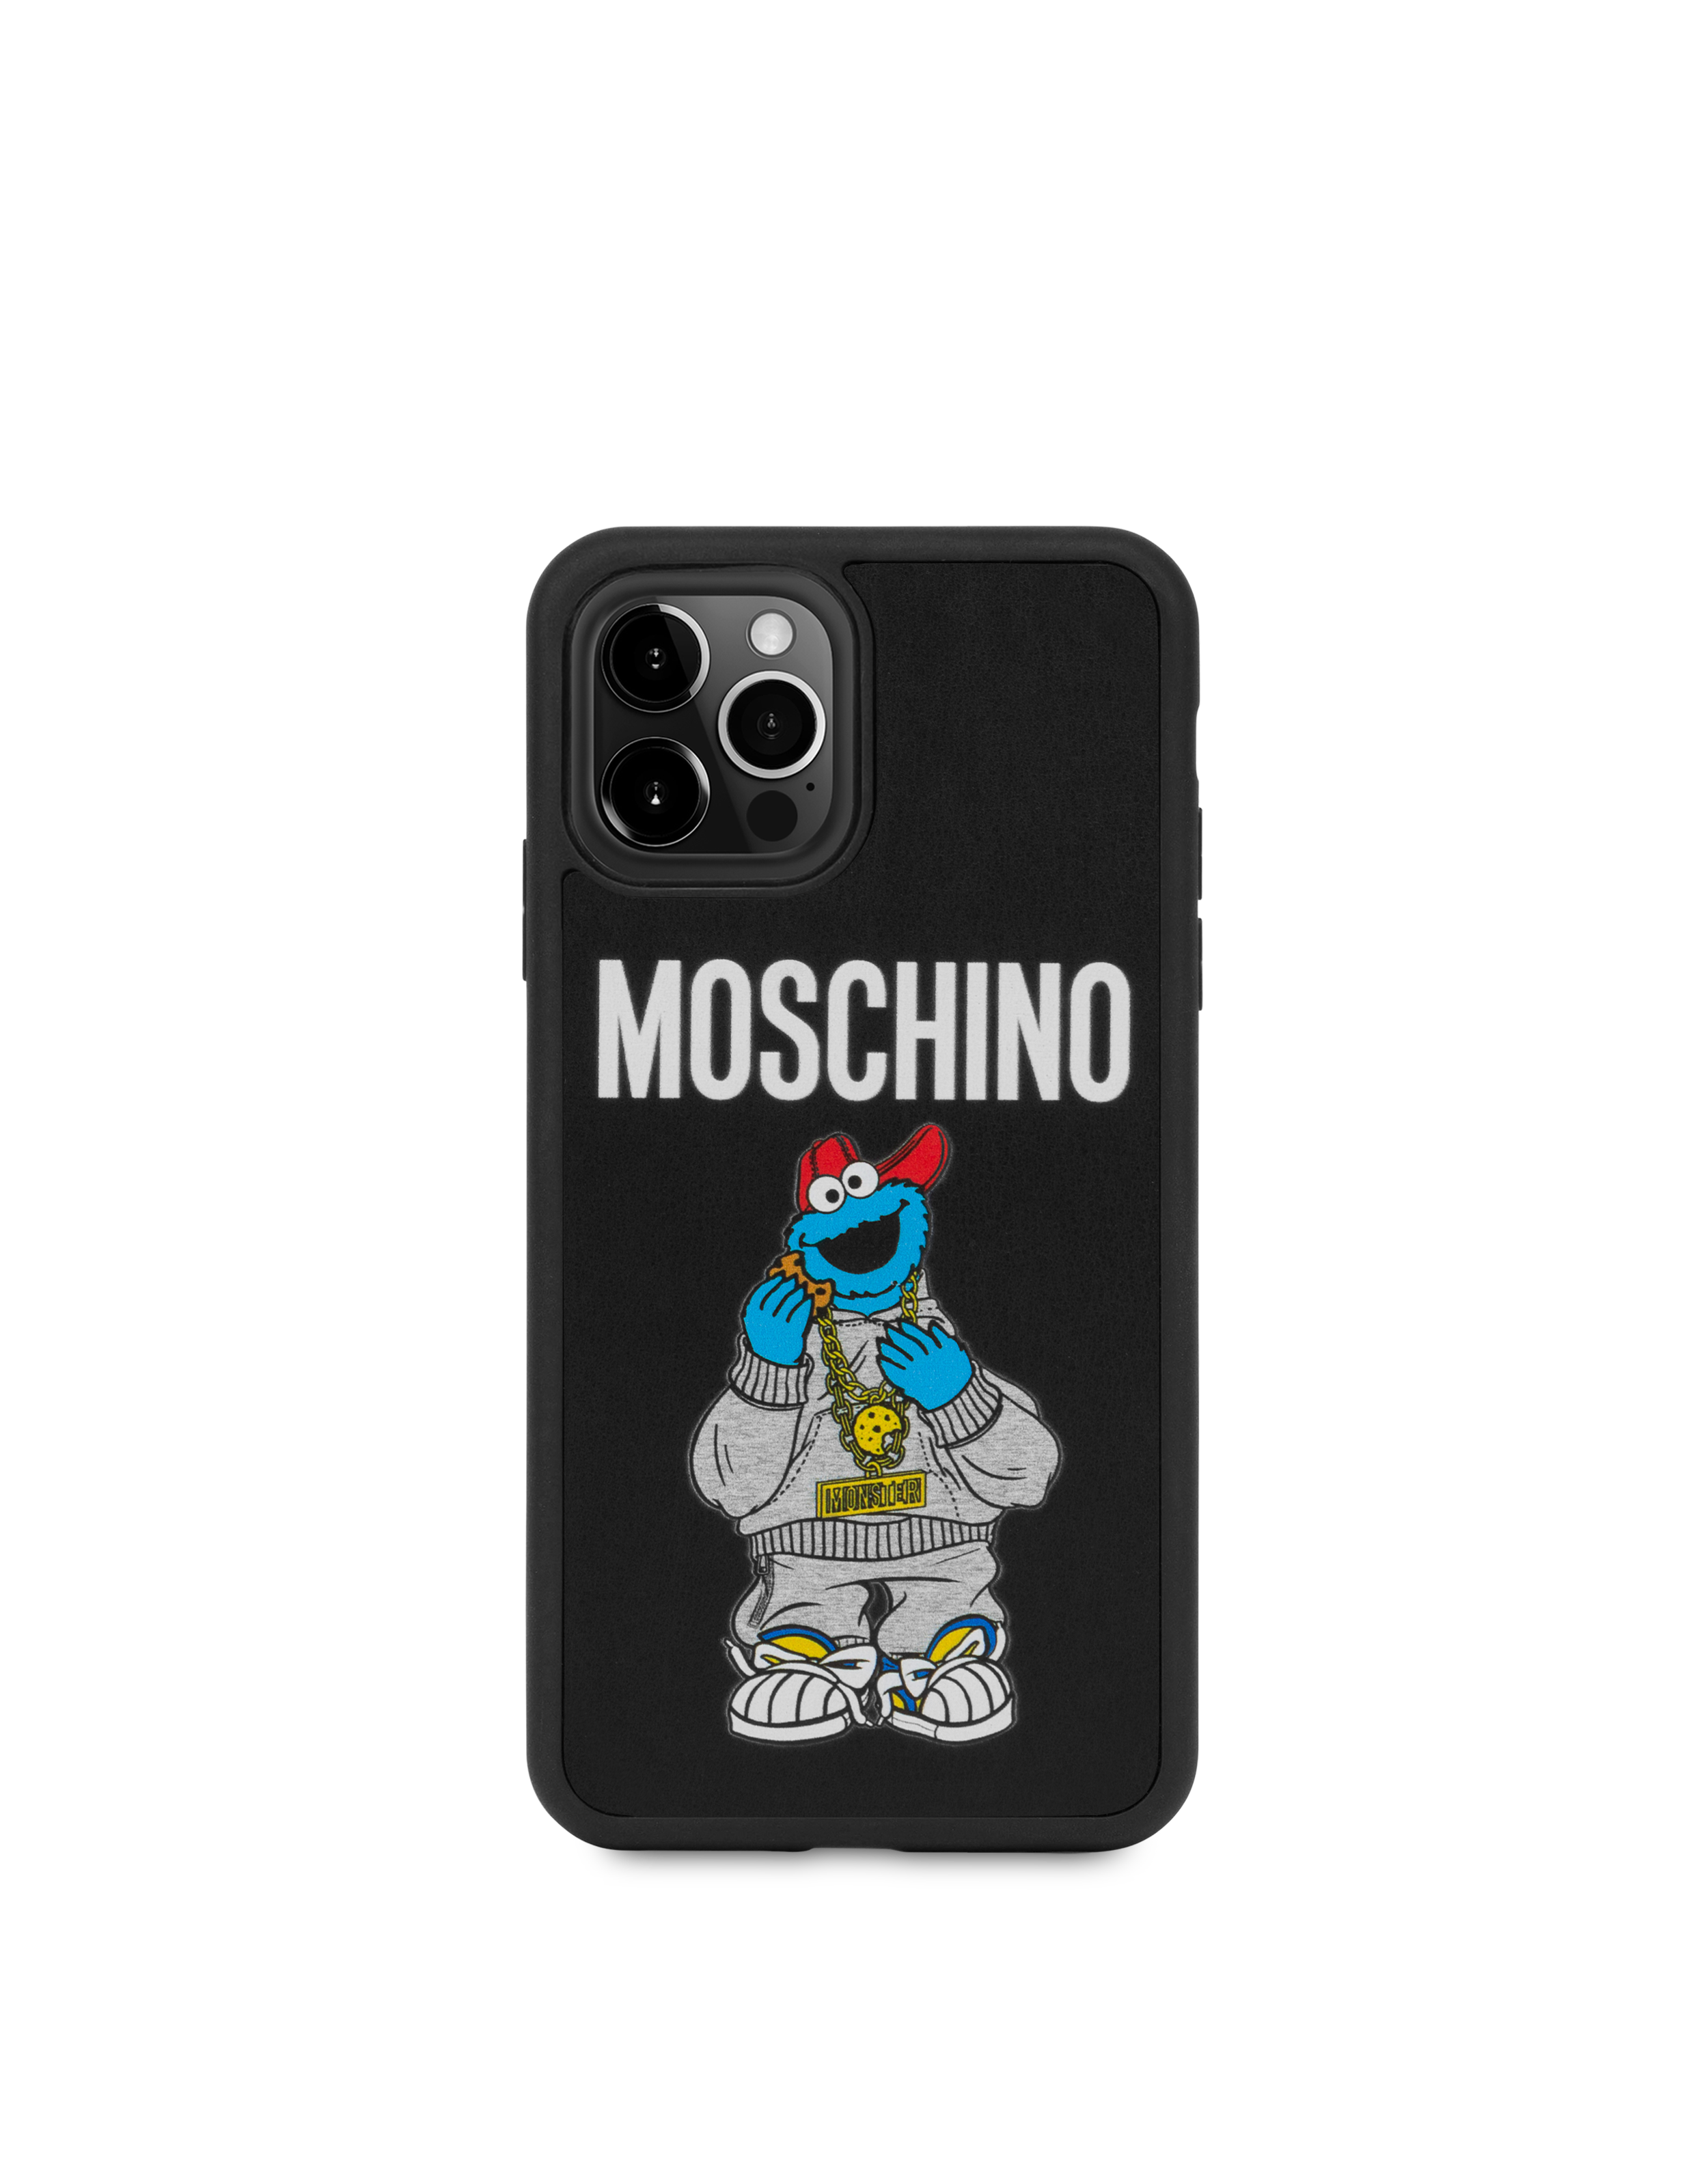 Moschino Hk Iphone Air Pods Cases Page 2 Moschino Hong Kong